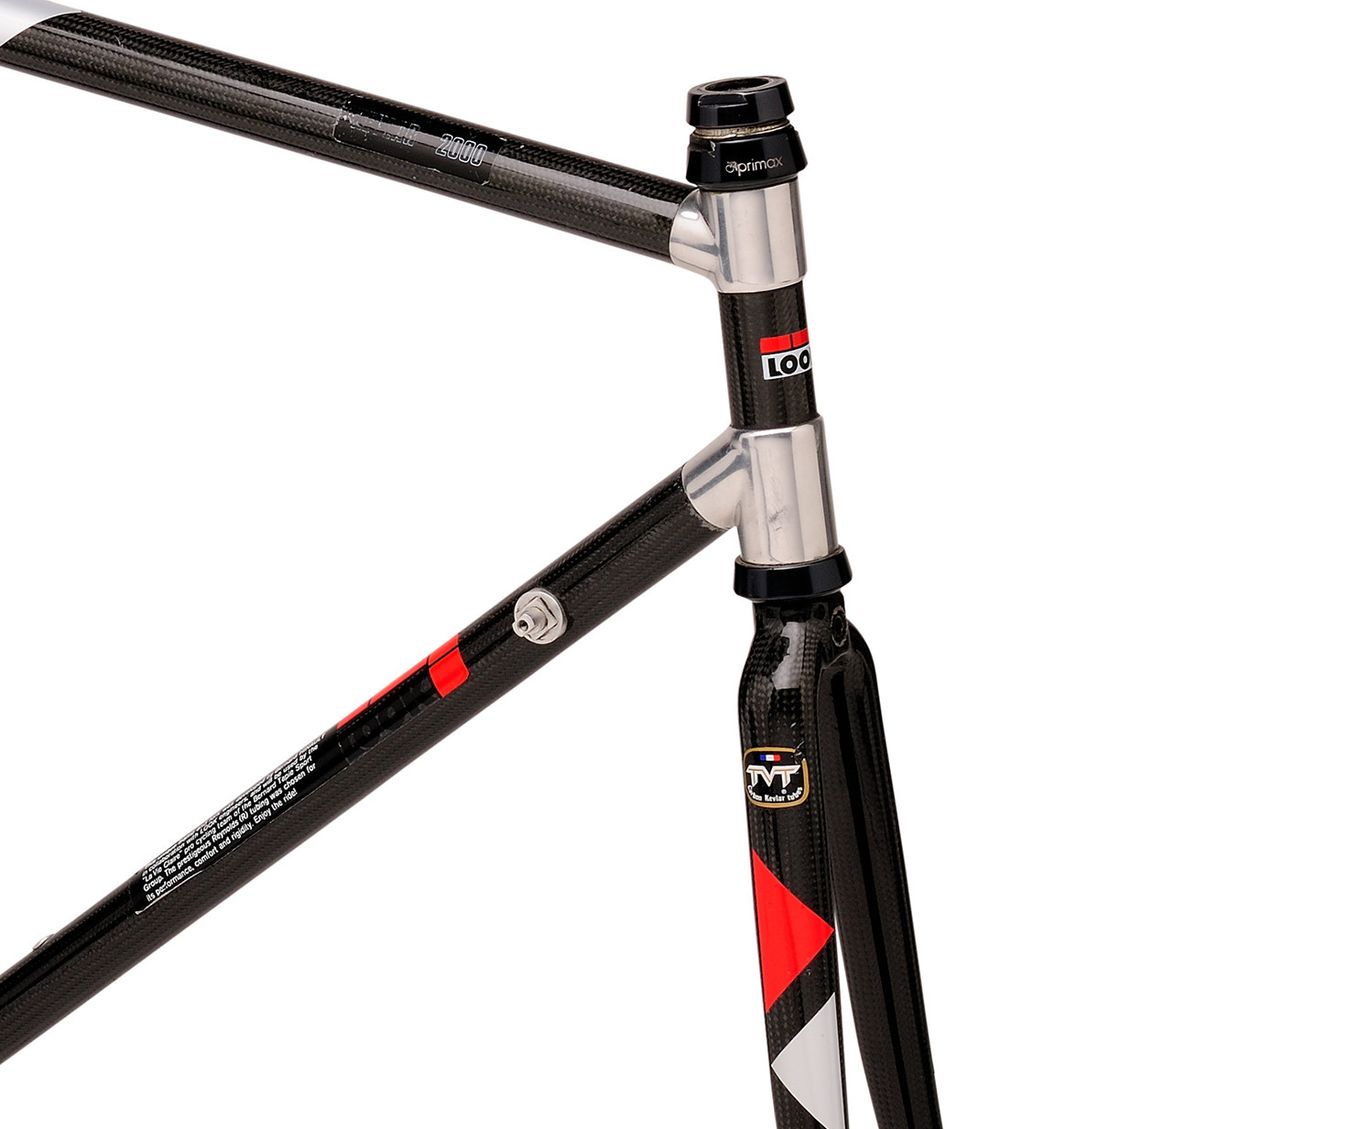 The KG86 marked the introduction of carbon fibre in to the professional peloton 